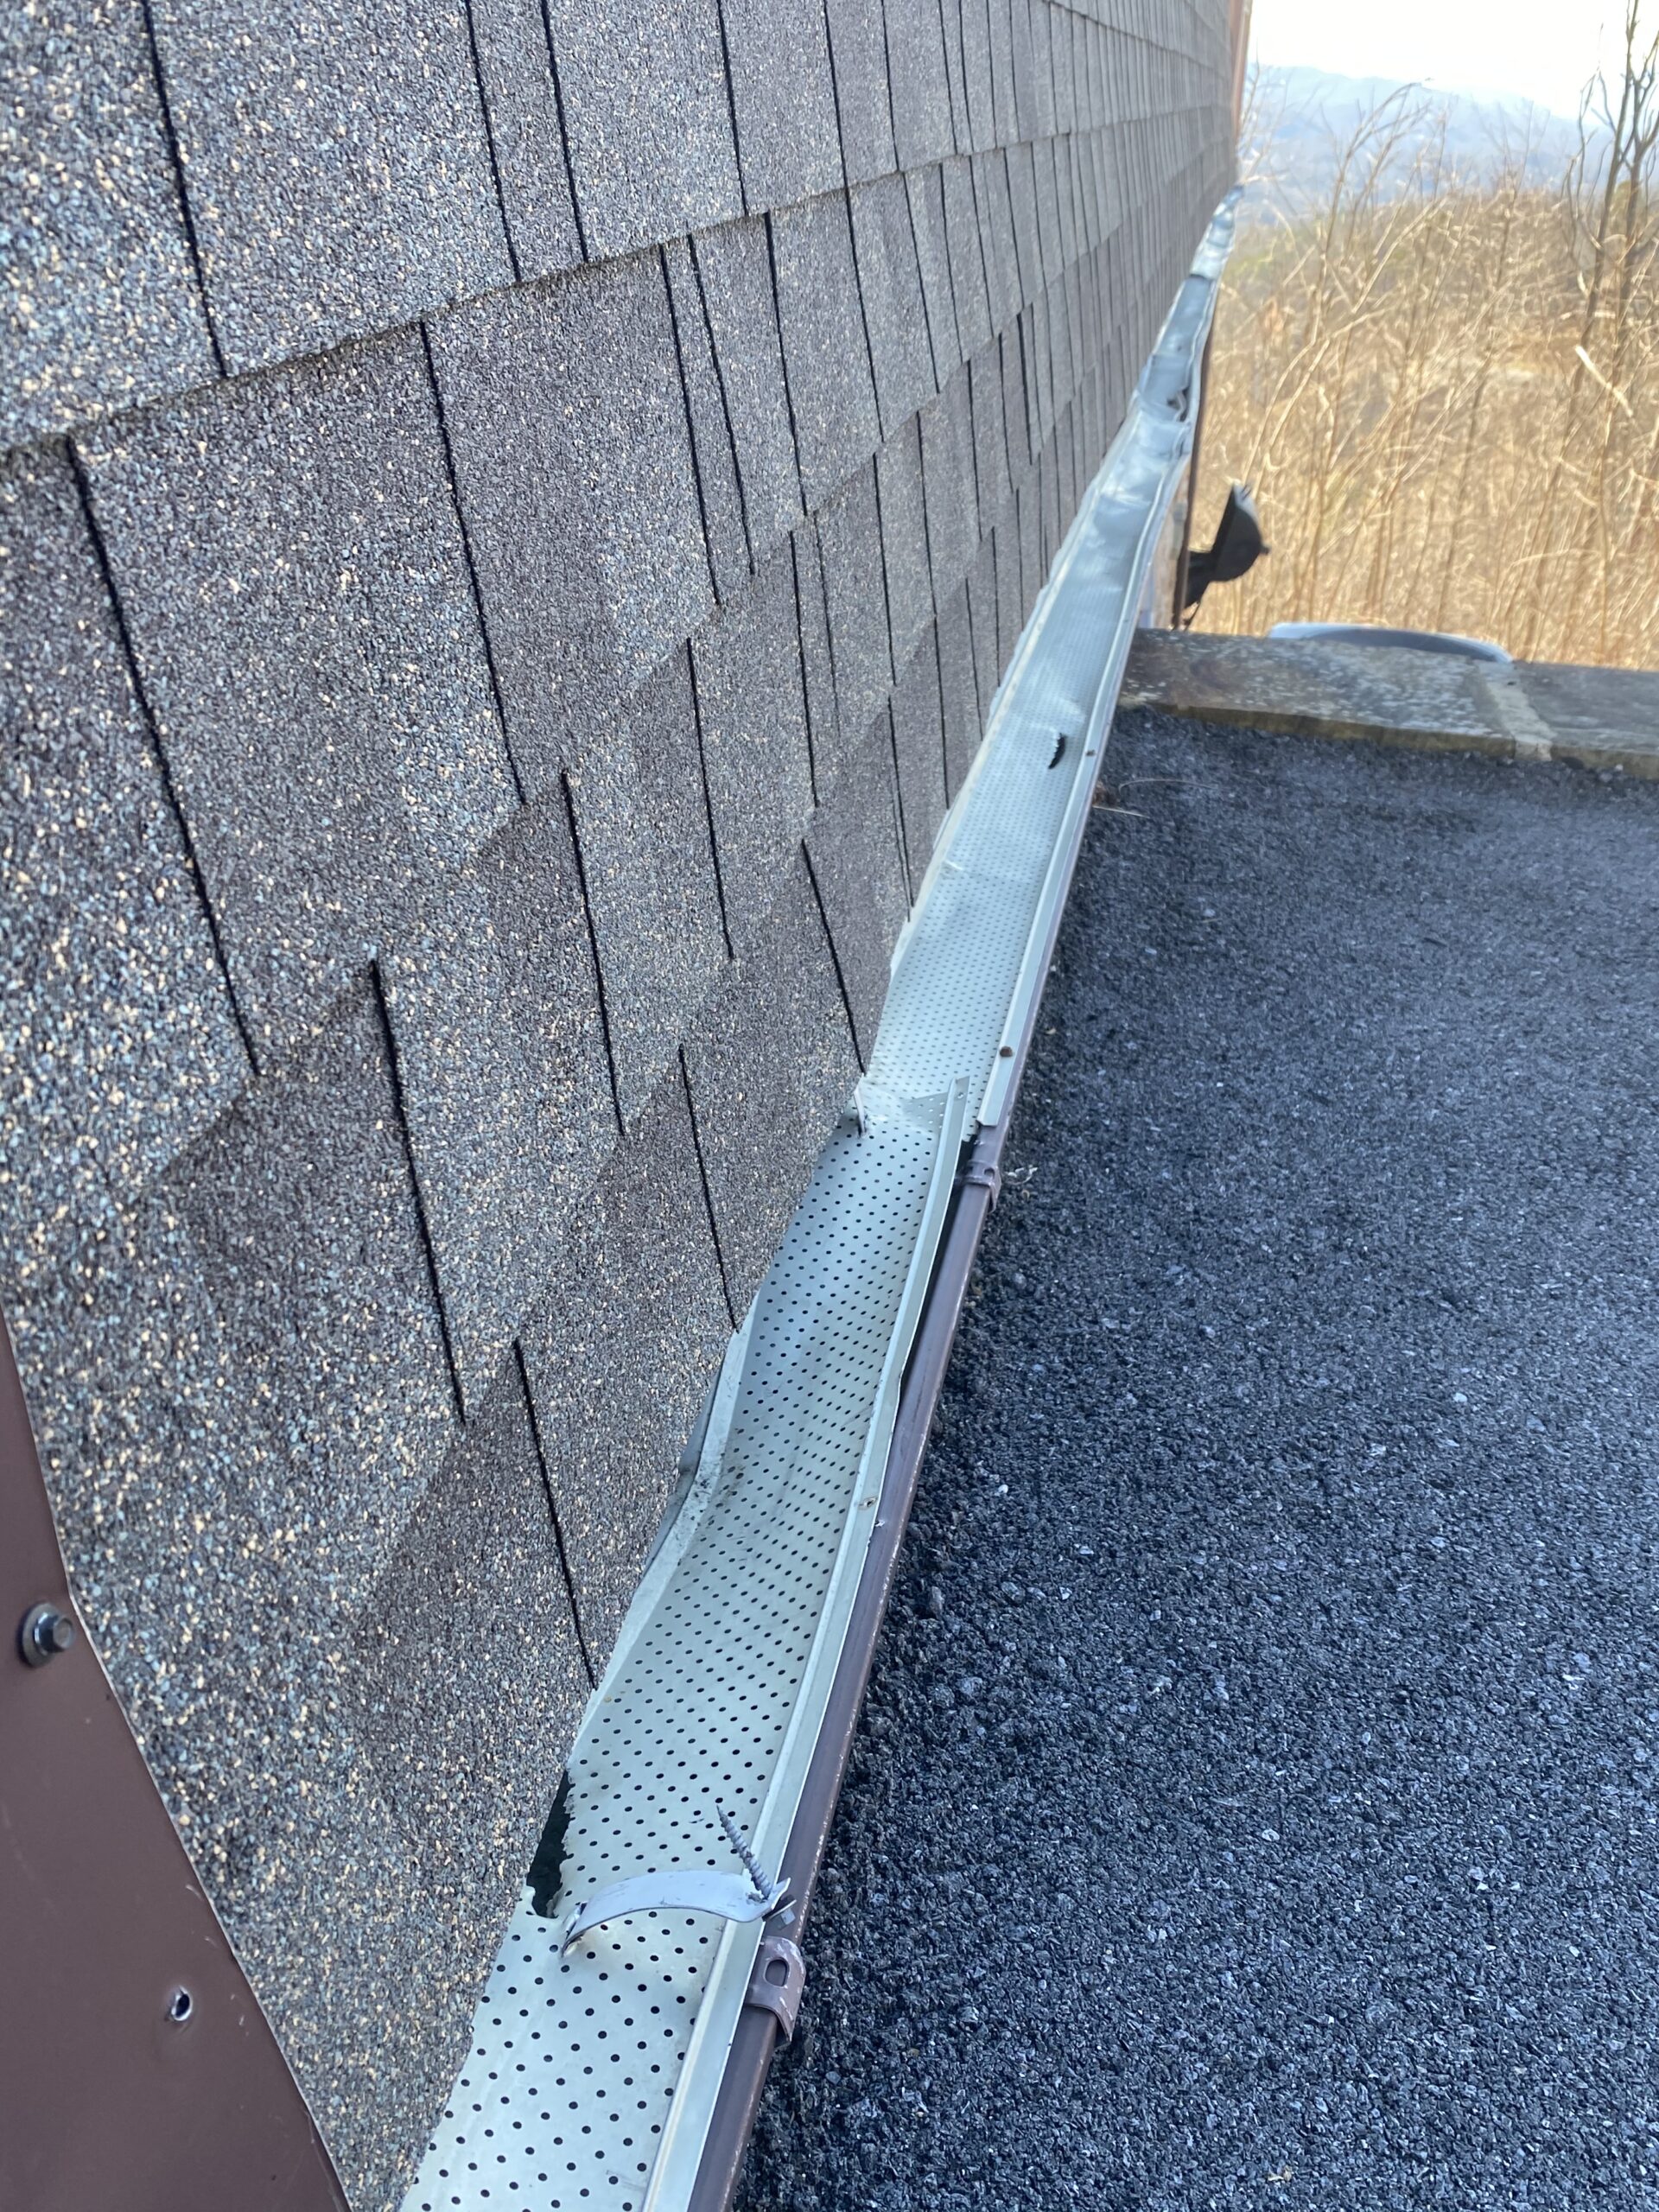 This is a picture of old gutters and gutter guards that need to be replaced